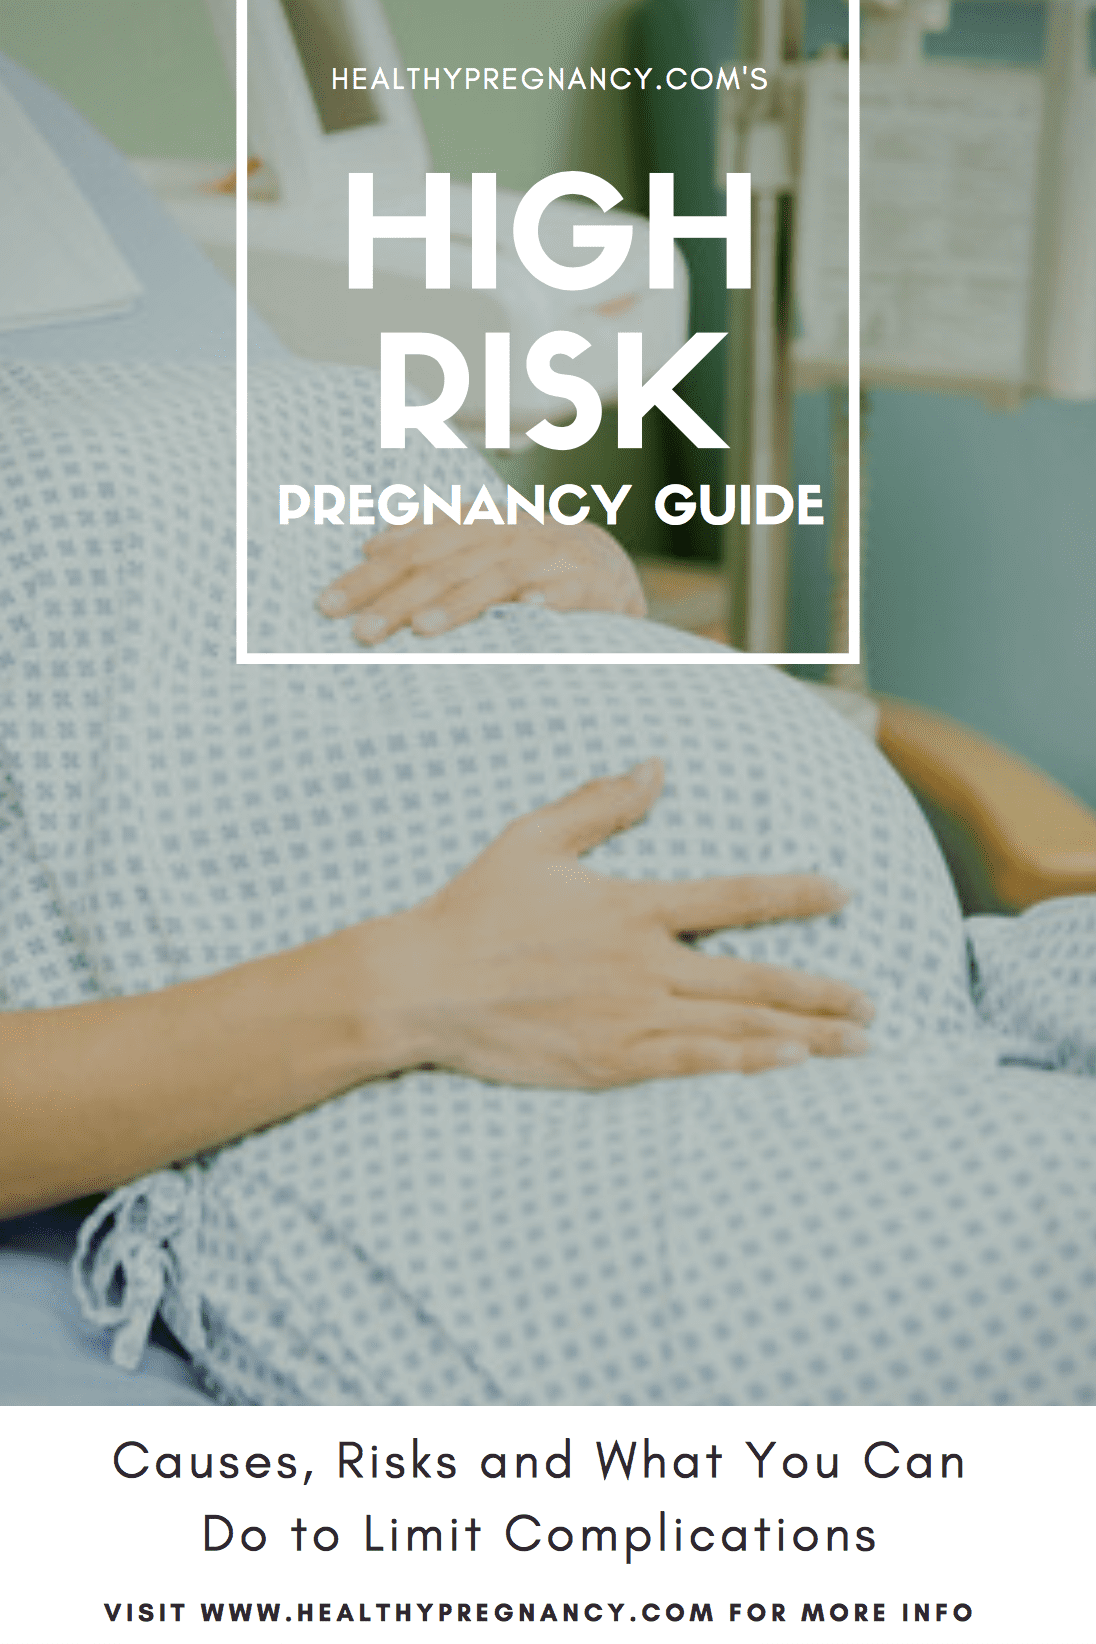 A Guide to High-Risk Pregnancy; a look at the causes, risks and what expecting mothers can do to avoid complications during pregnancy and labor.